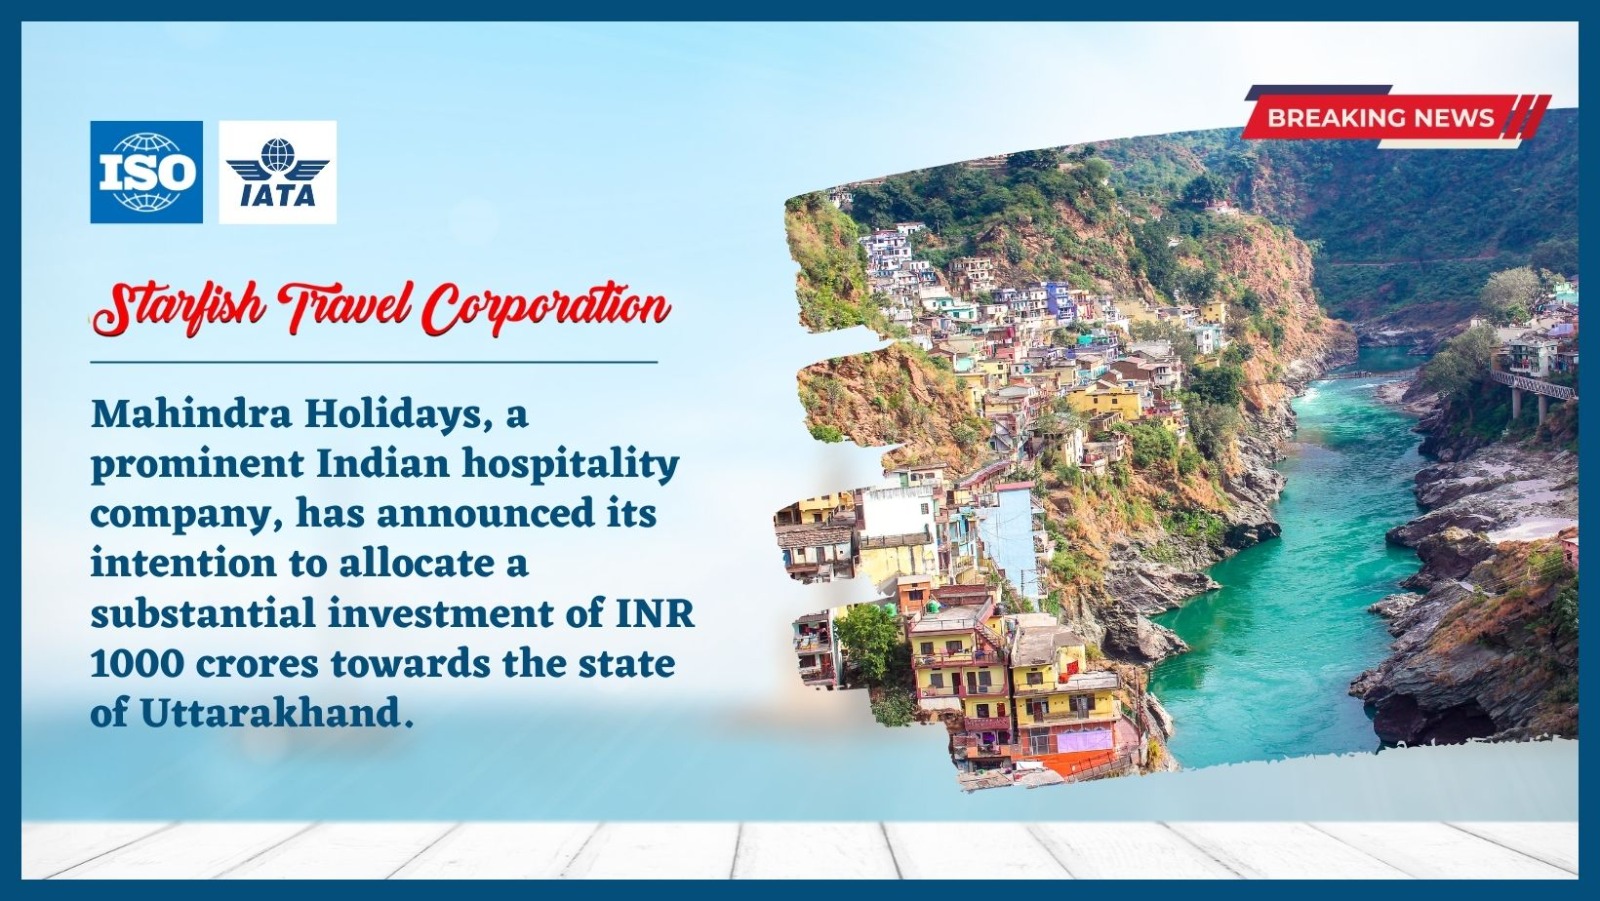 Mahindra Holidays, a prominent Indian hospitality company, has announced its intention to allocate a substantial investment of INR 1000 crores towards the state of Uttarakhand.